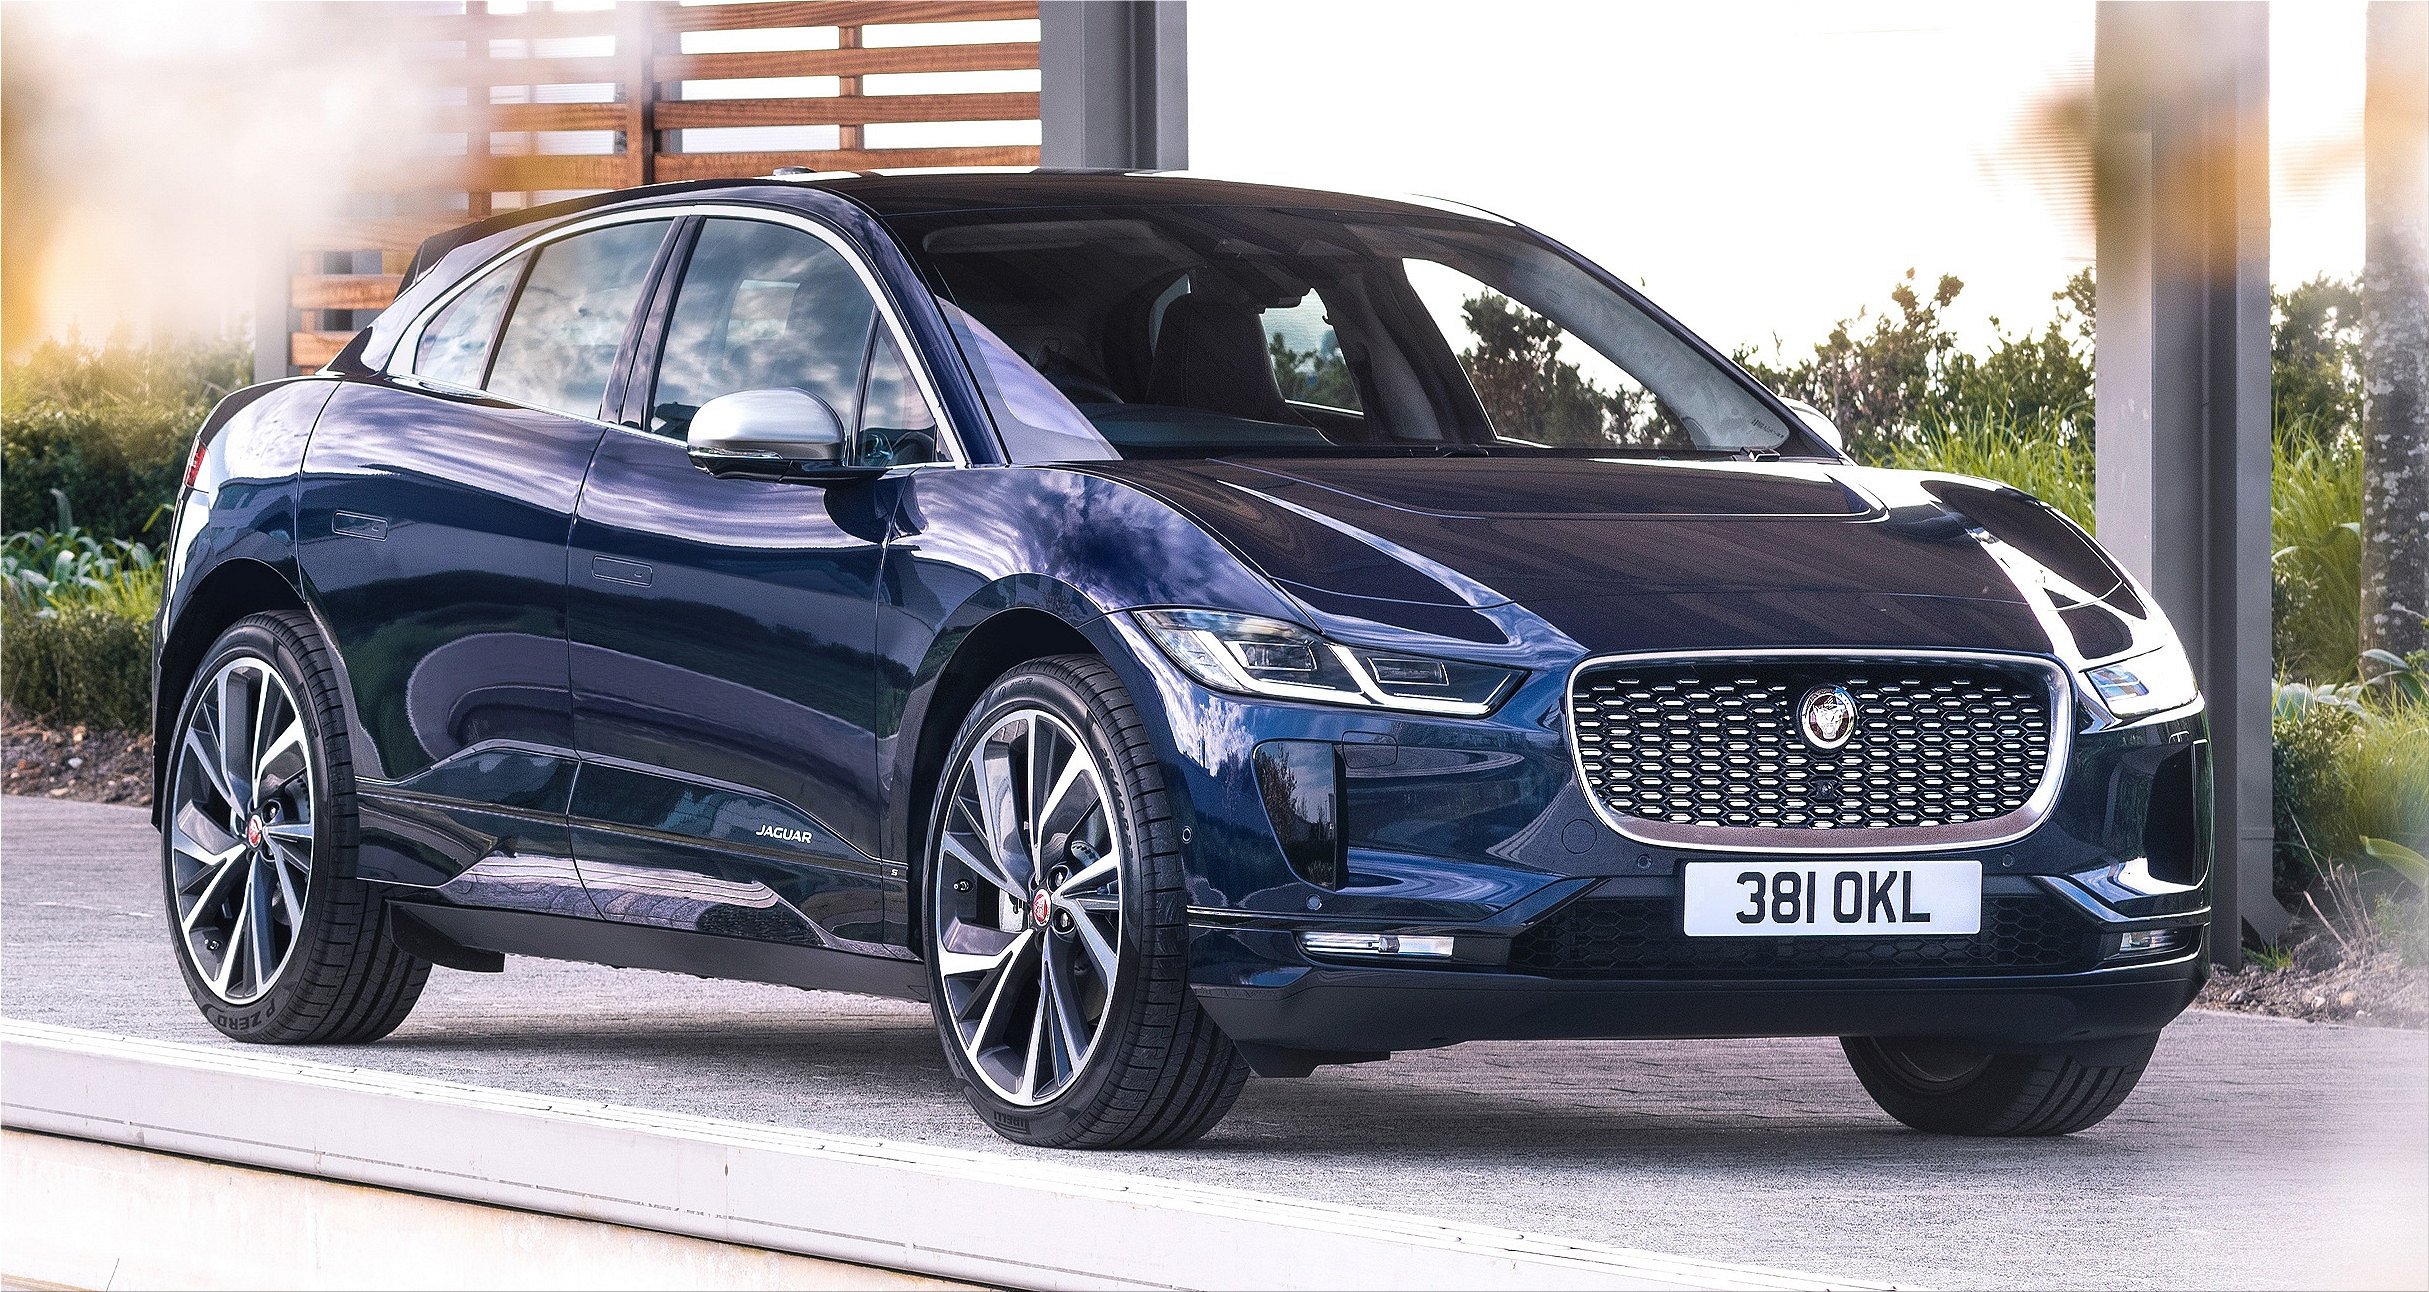 Jaguar IPace gets threephase charging Electric Hunter